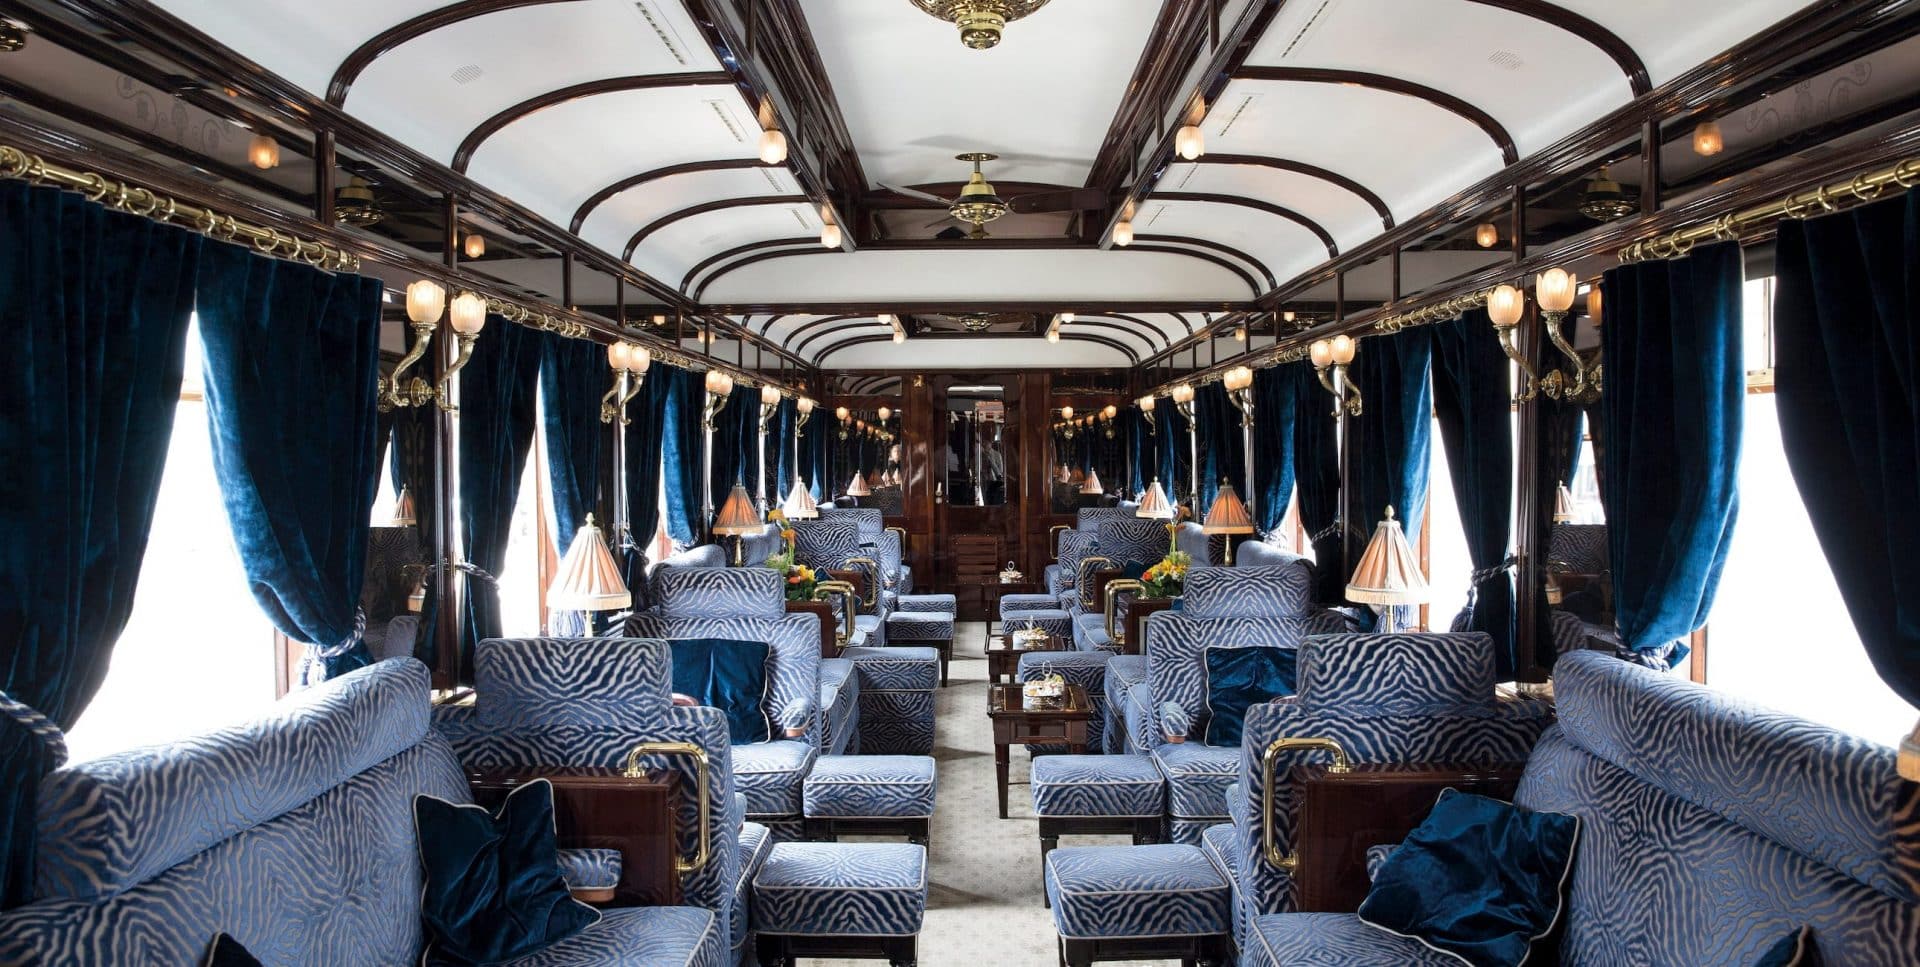 The 20 Most Instagrammable Train Journeys